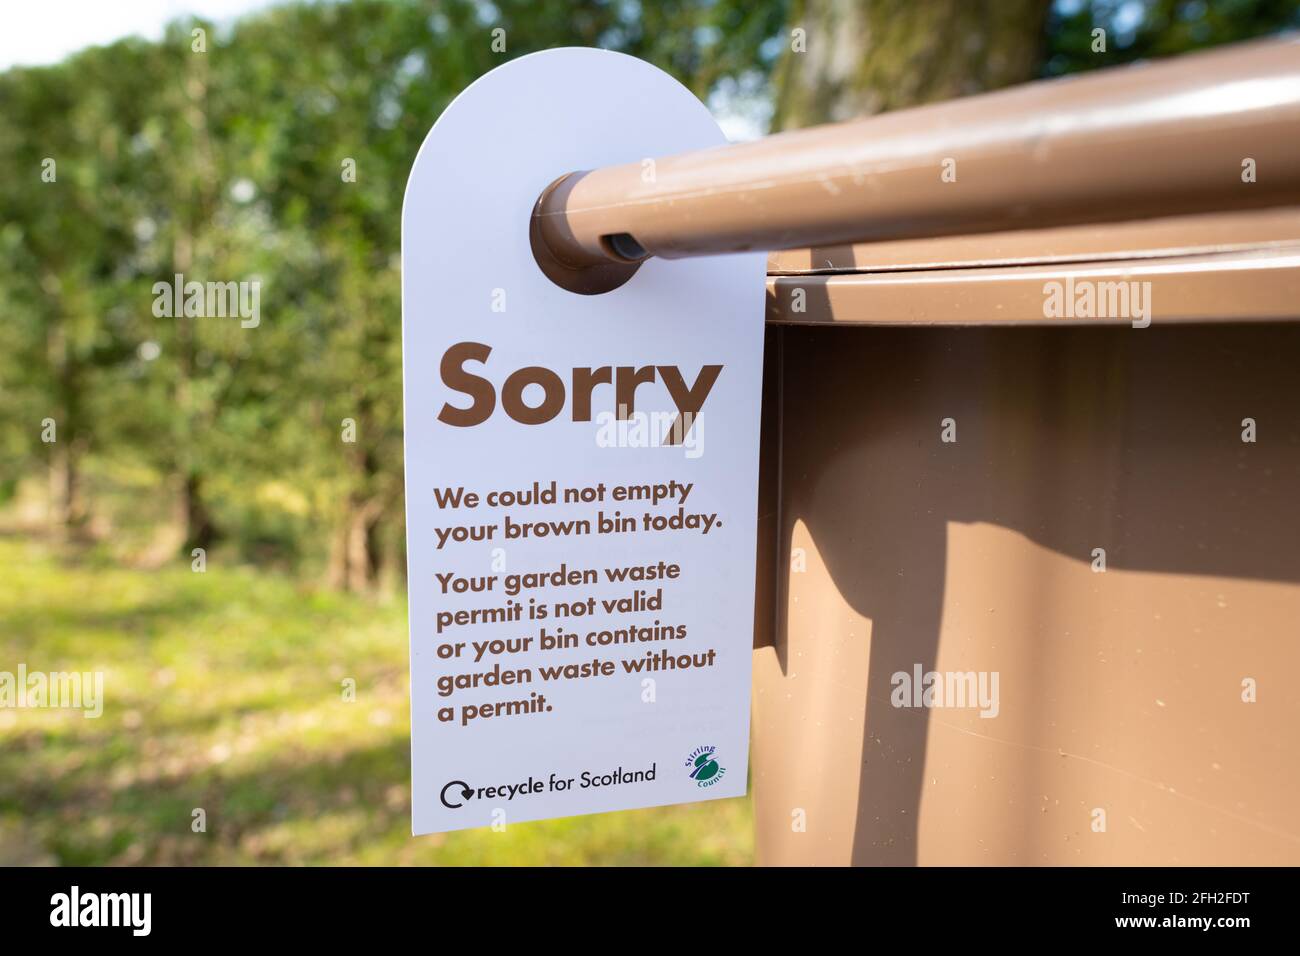 Garden Waste permit - Sorry we could not empty your brown bin today notice on brown bin - Stirling, Scotland, UK Stock Photo